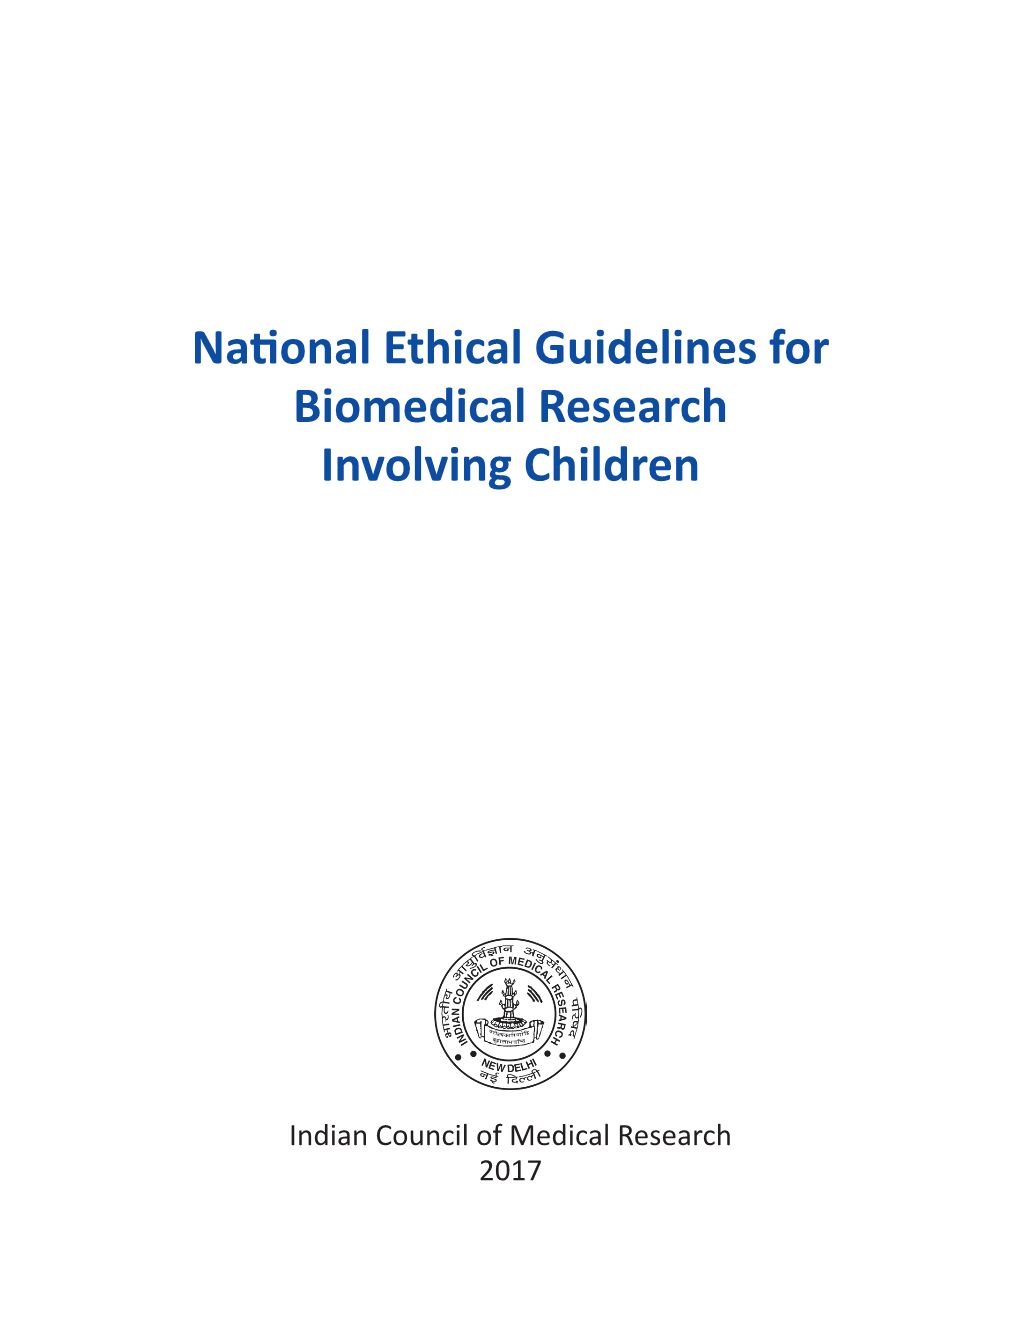 National Ethical Guidelines for Biomedical Research Involving Children